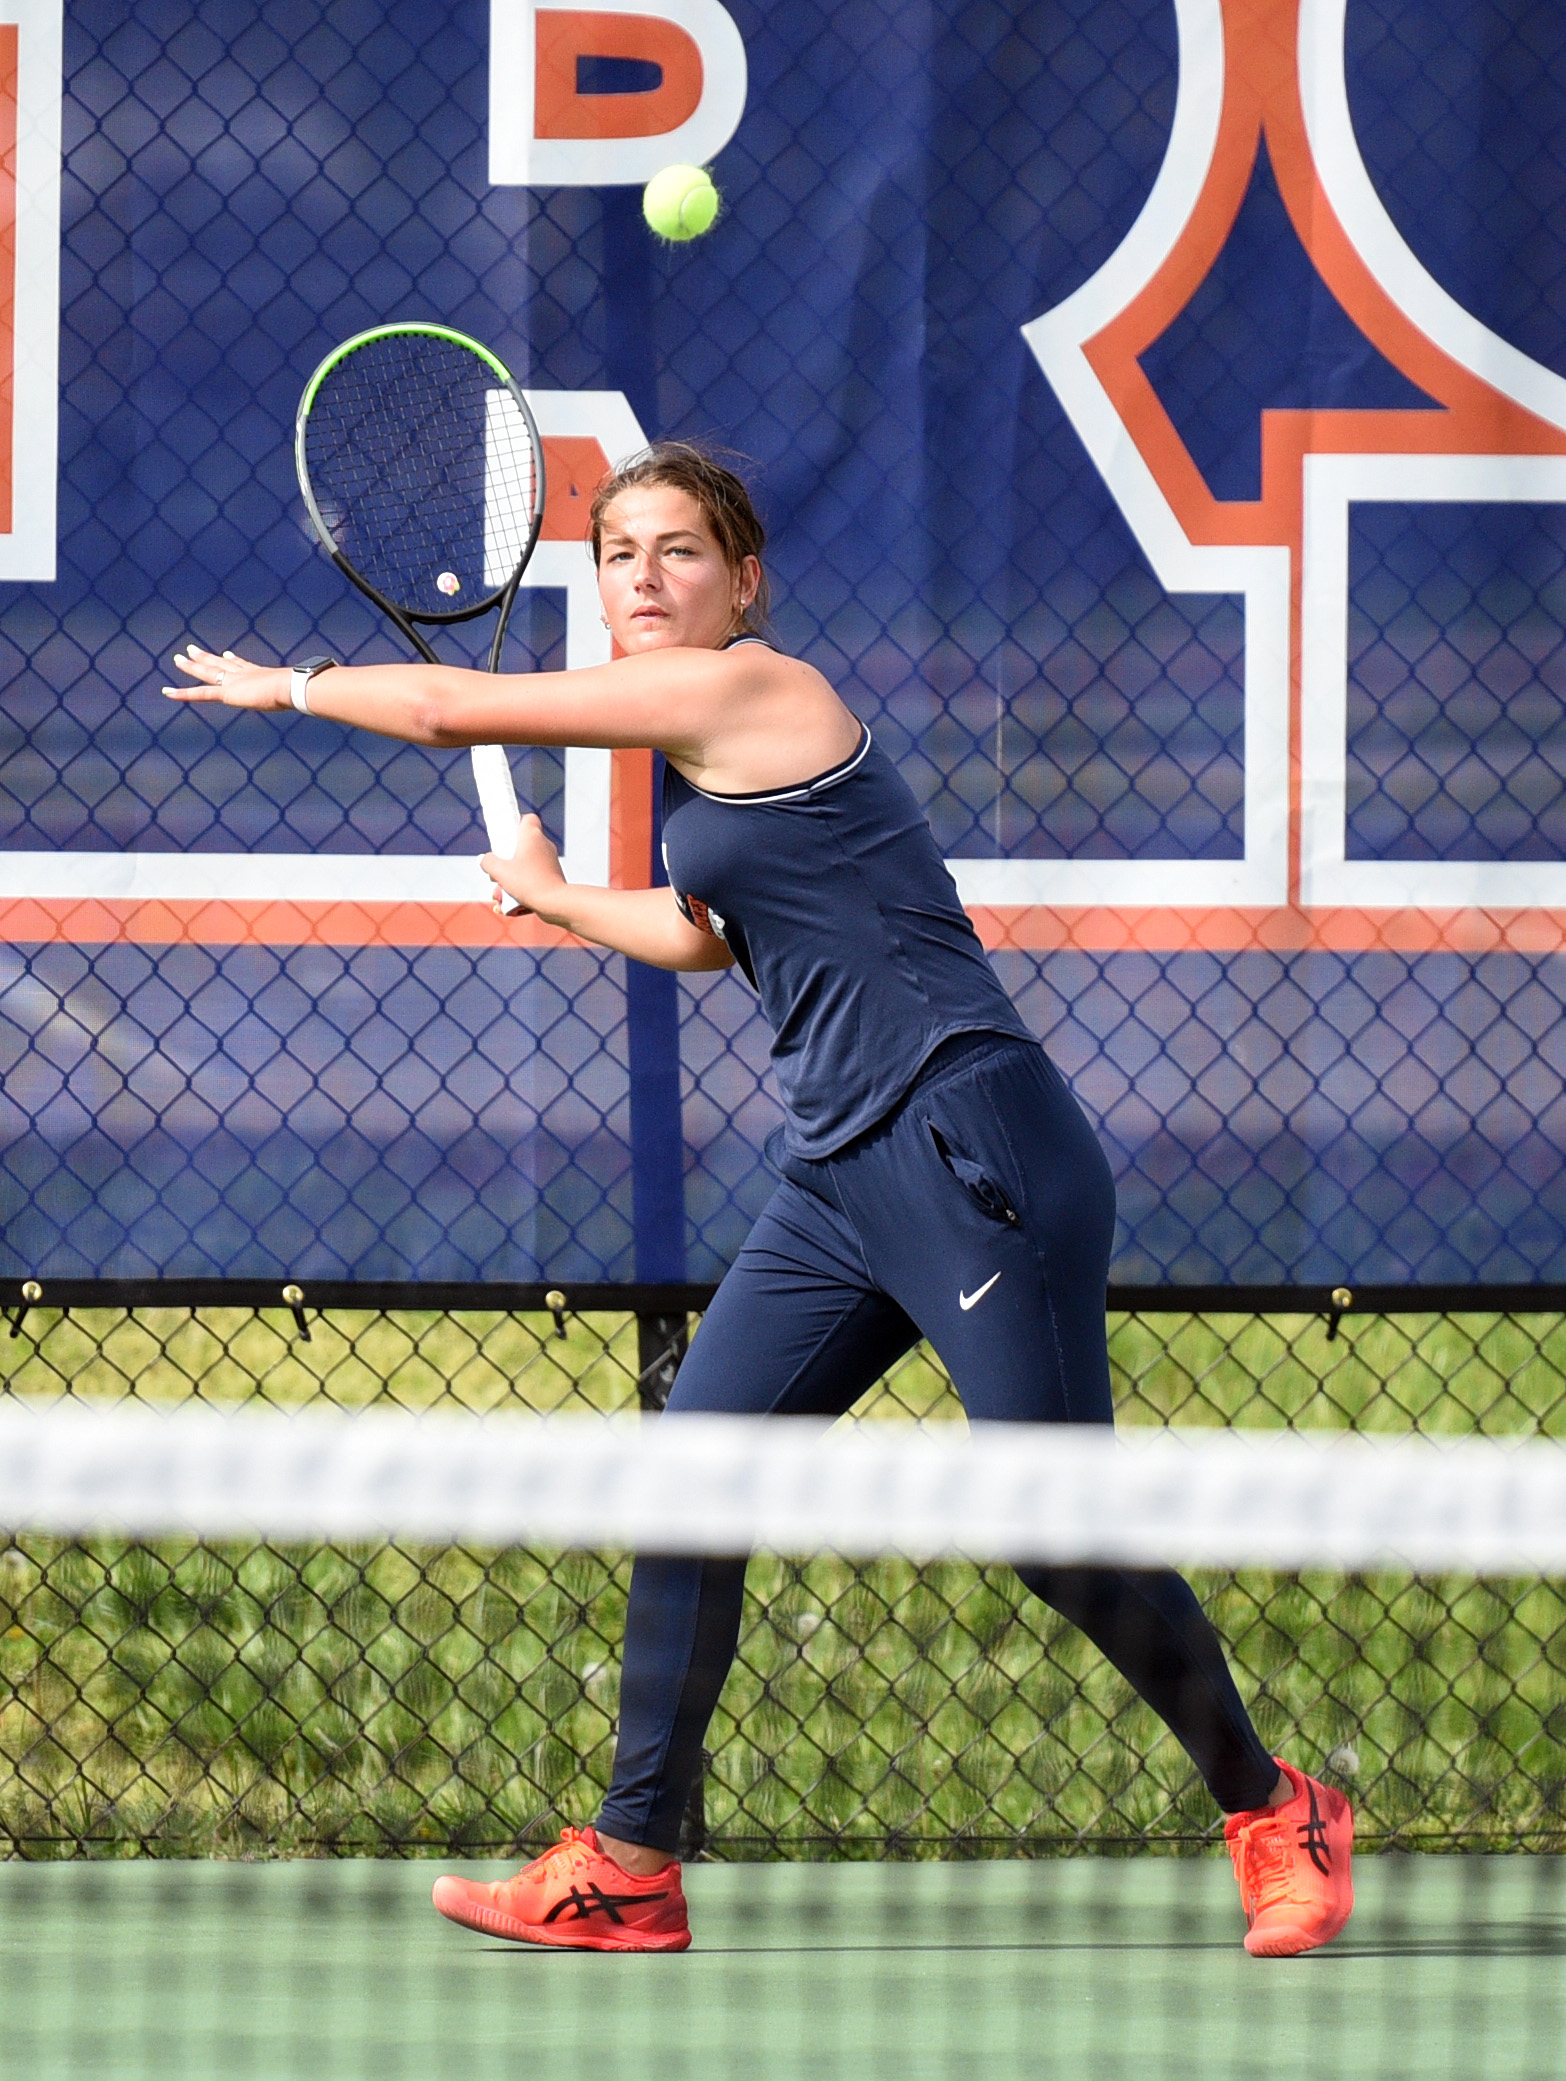 Chornei Takes First, Resende Competes in Semifinals of the ITA Regionals